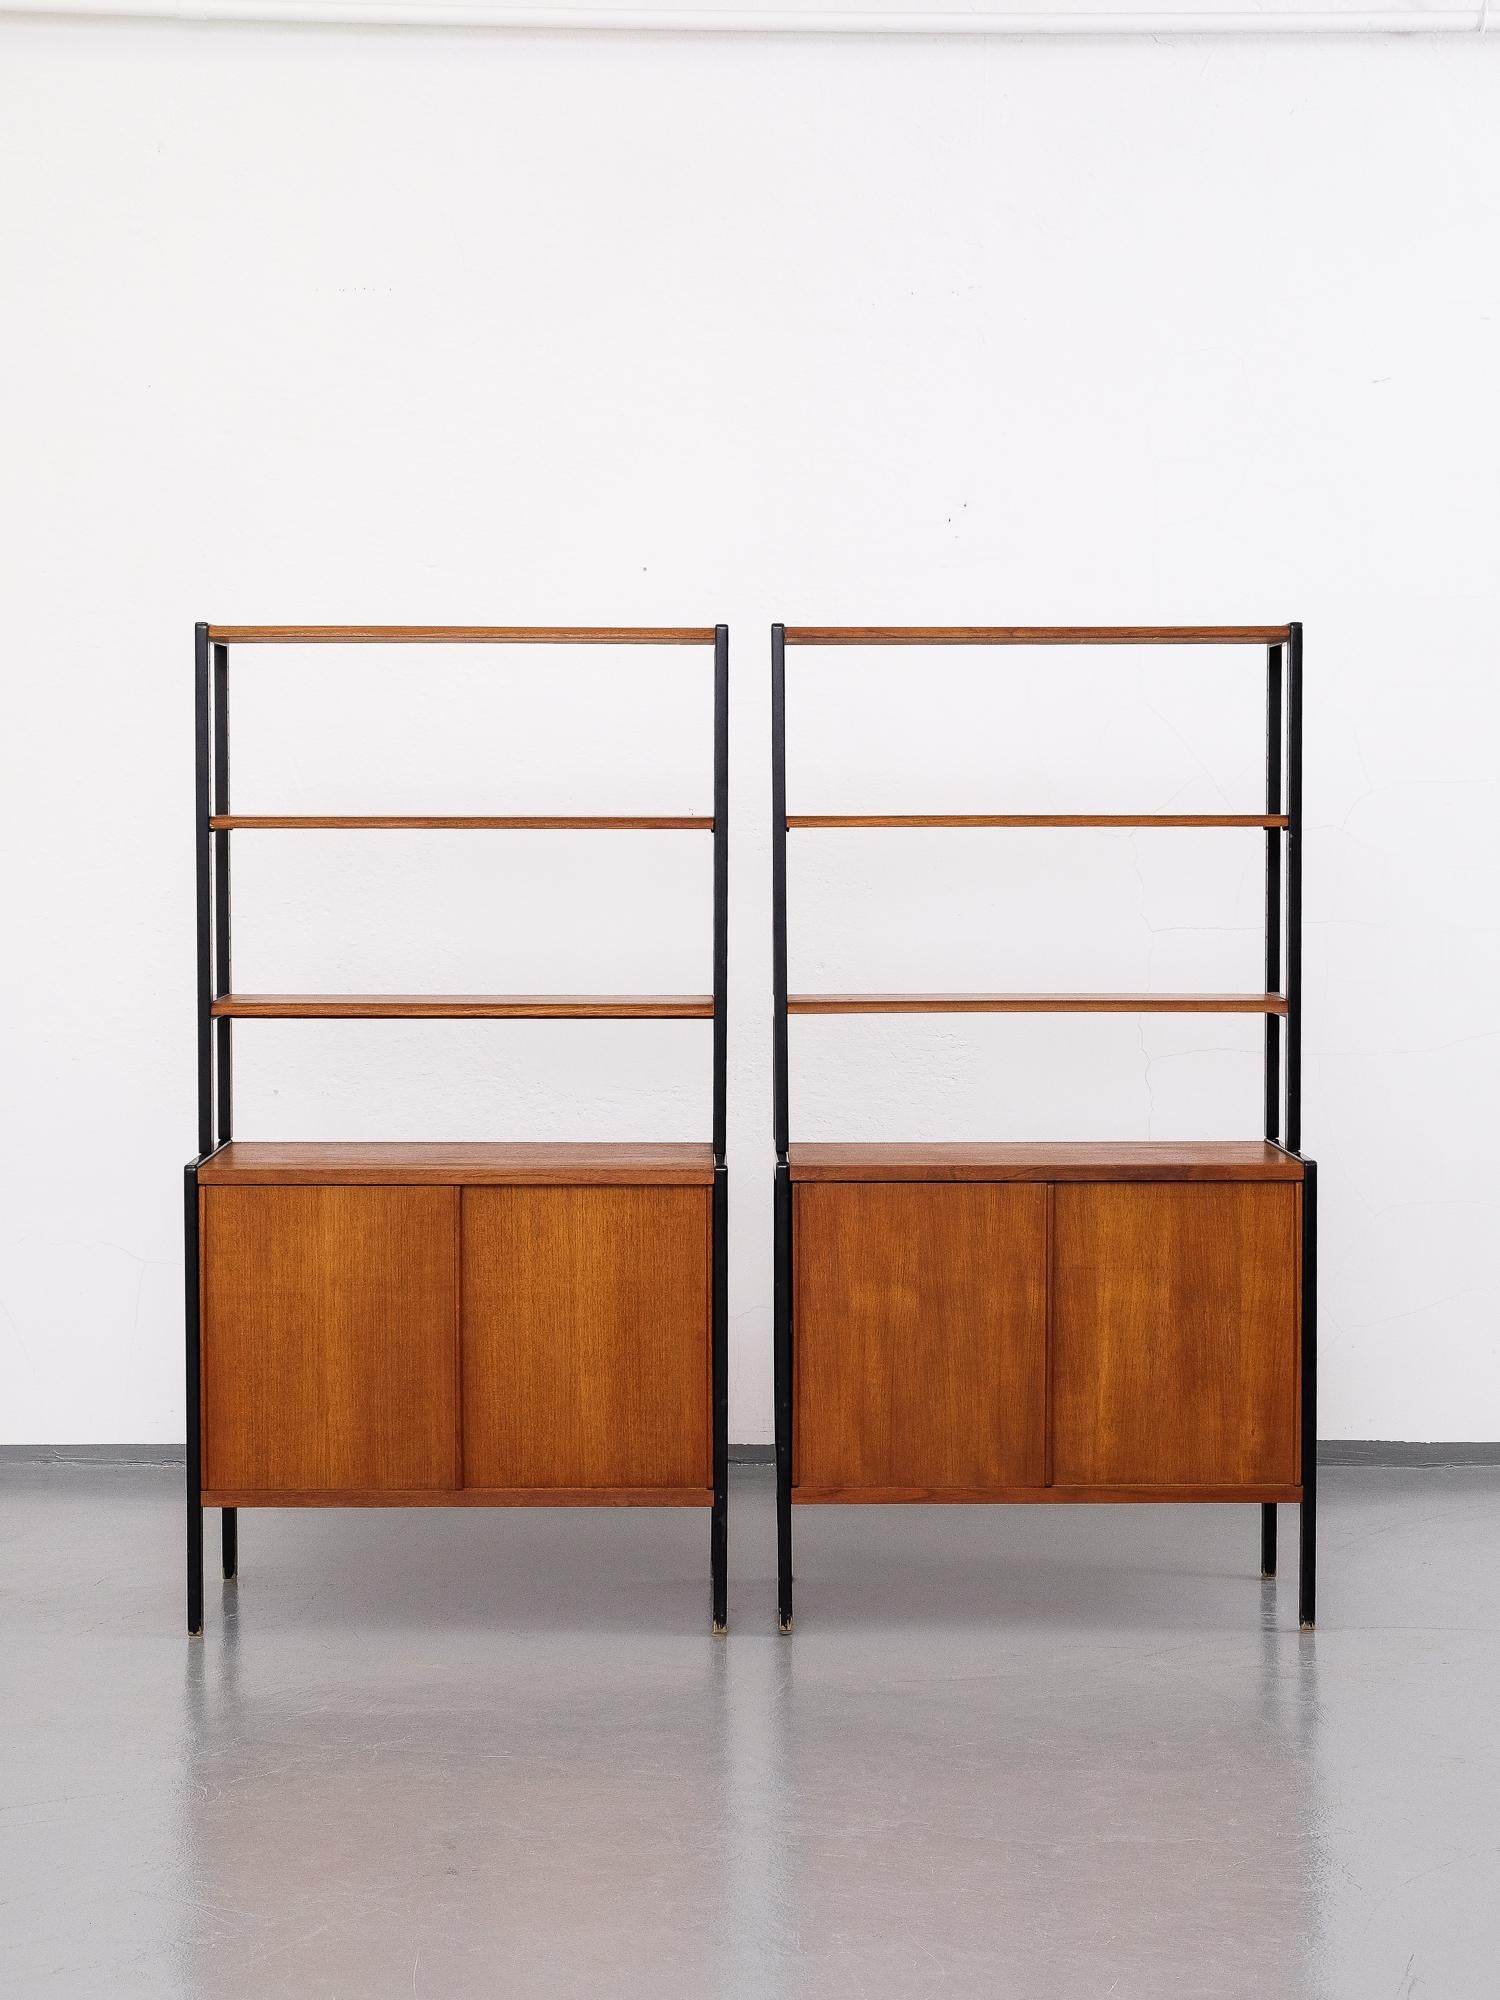 Beautiful and elegant teak bookcases with brass details by Bertil Fridhagen for Bodafors, Sweden, 1950s.

The lower part of the cabinet has two sliding doors, the top part has three shelves.

Marked with 